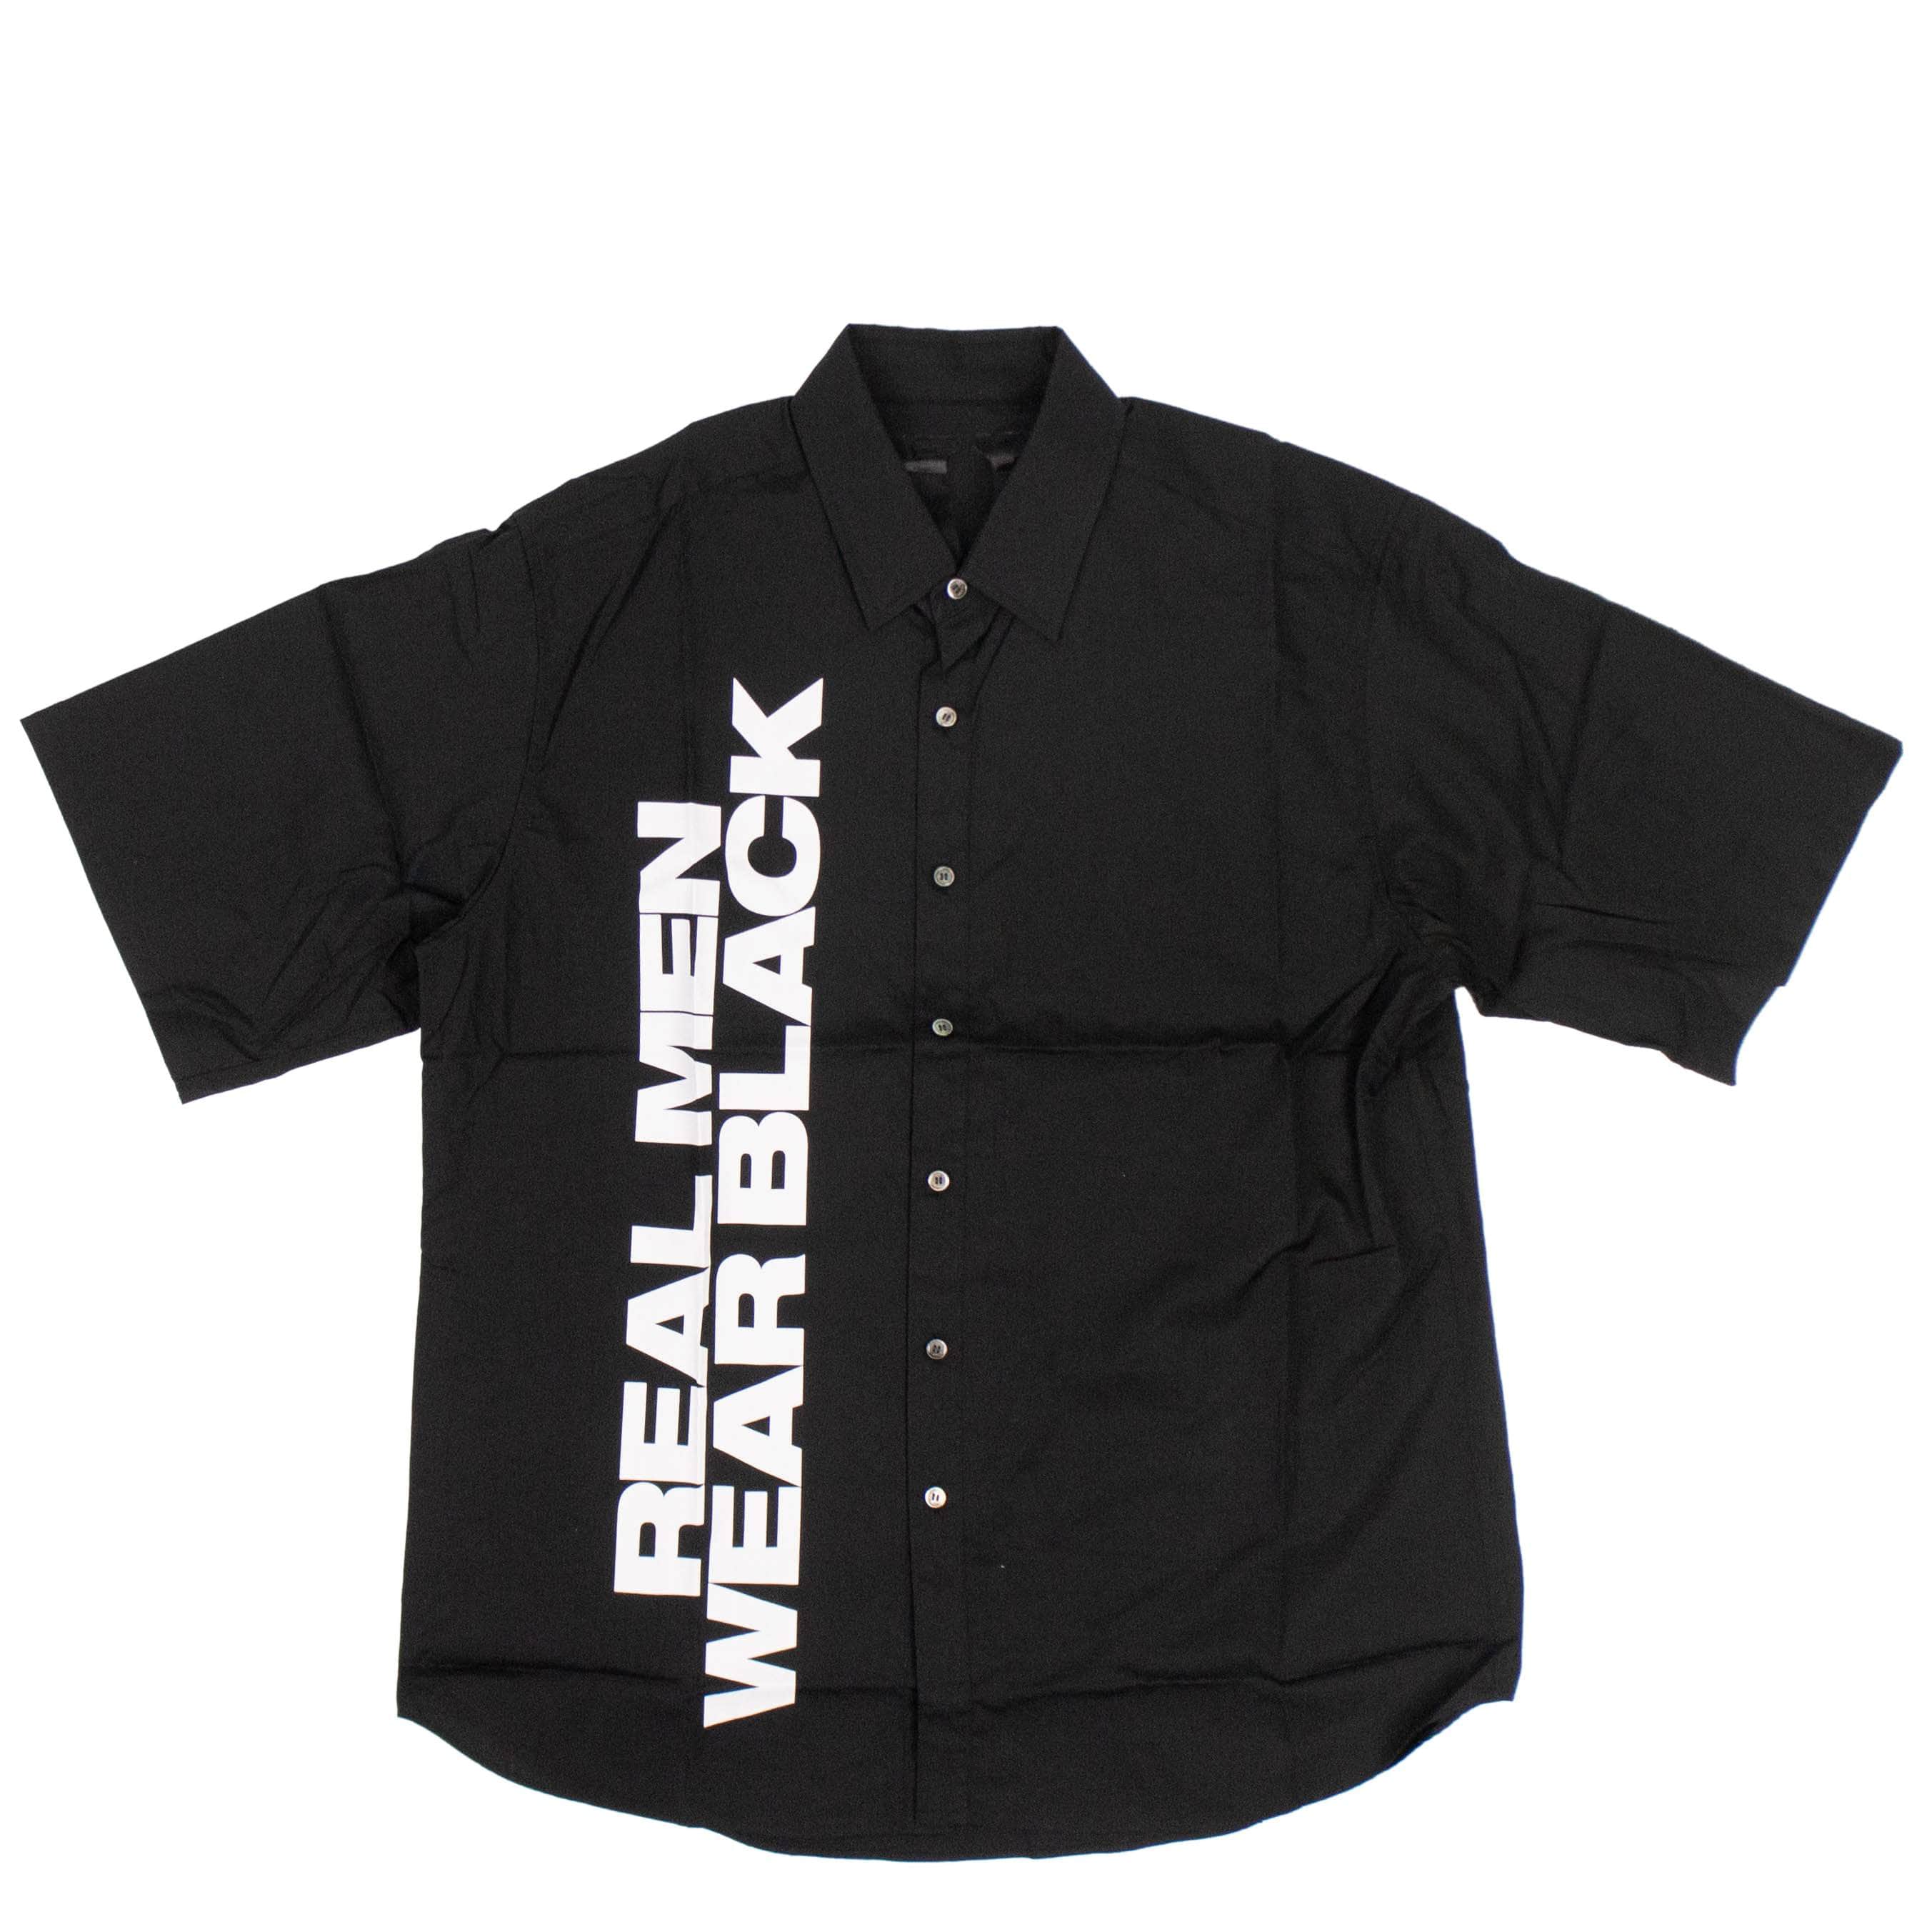 Vlone channelenable-all, chicmi, couponcollection, gender-mens, main-clothing, mens-shoes, shop375, under-250, vlone XL Black Real Men Wear Black Button Down Short Sleeve Shirt 72V-18/XL 72V-18/XL